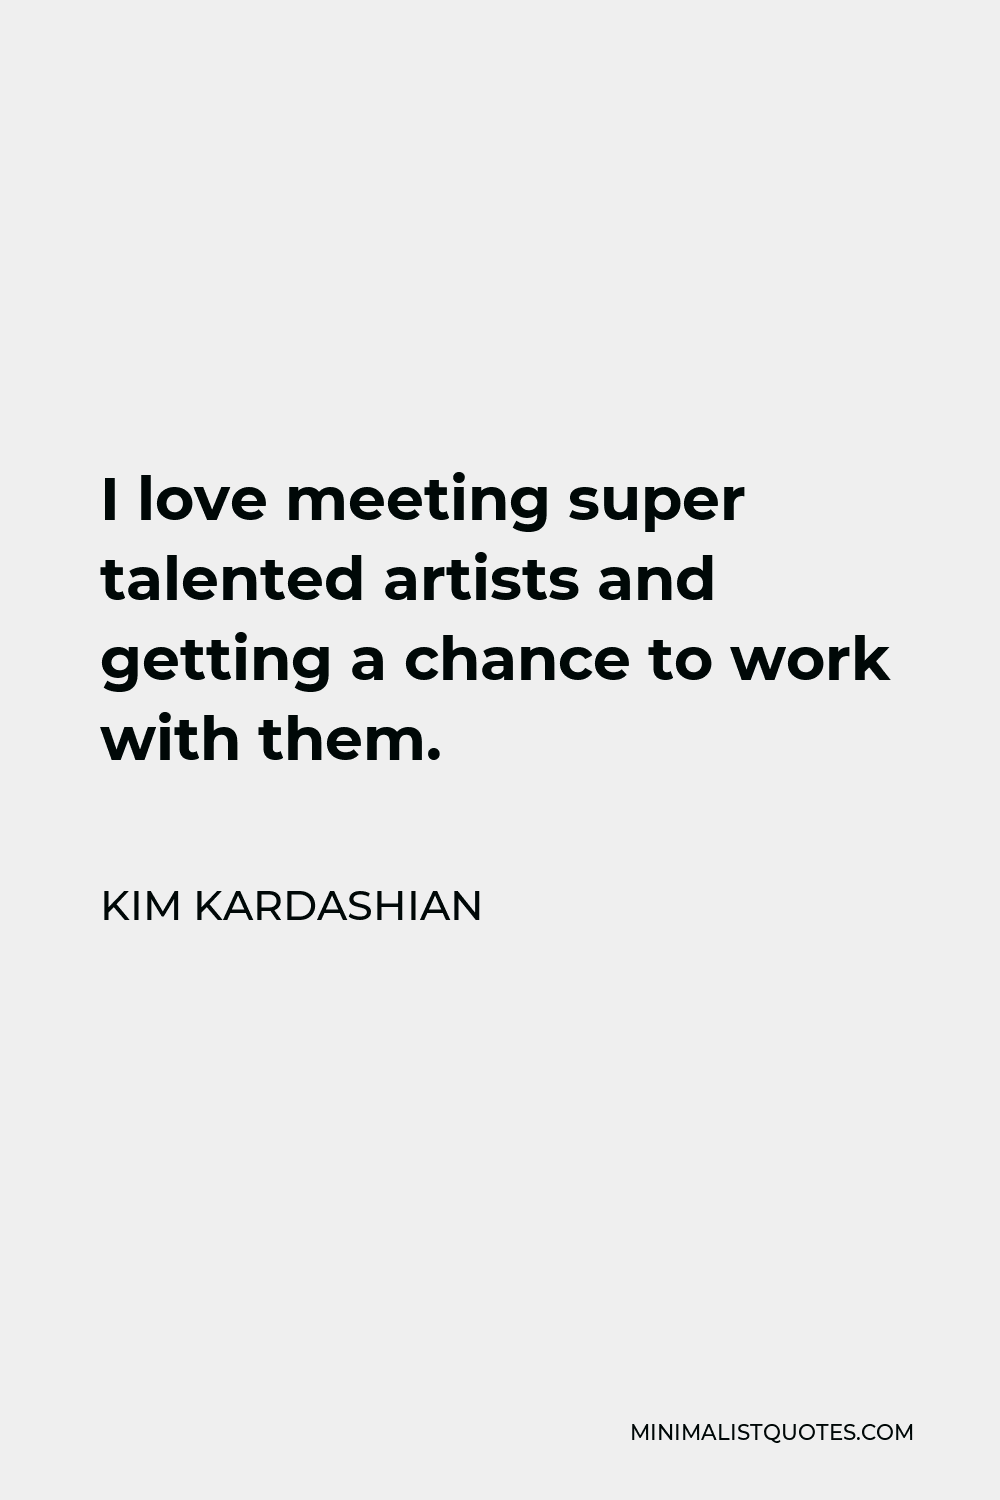 Kim Kardashian Quote - I love meeting super talented artists and getting a chance to work with them.